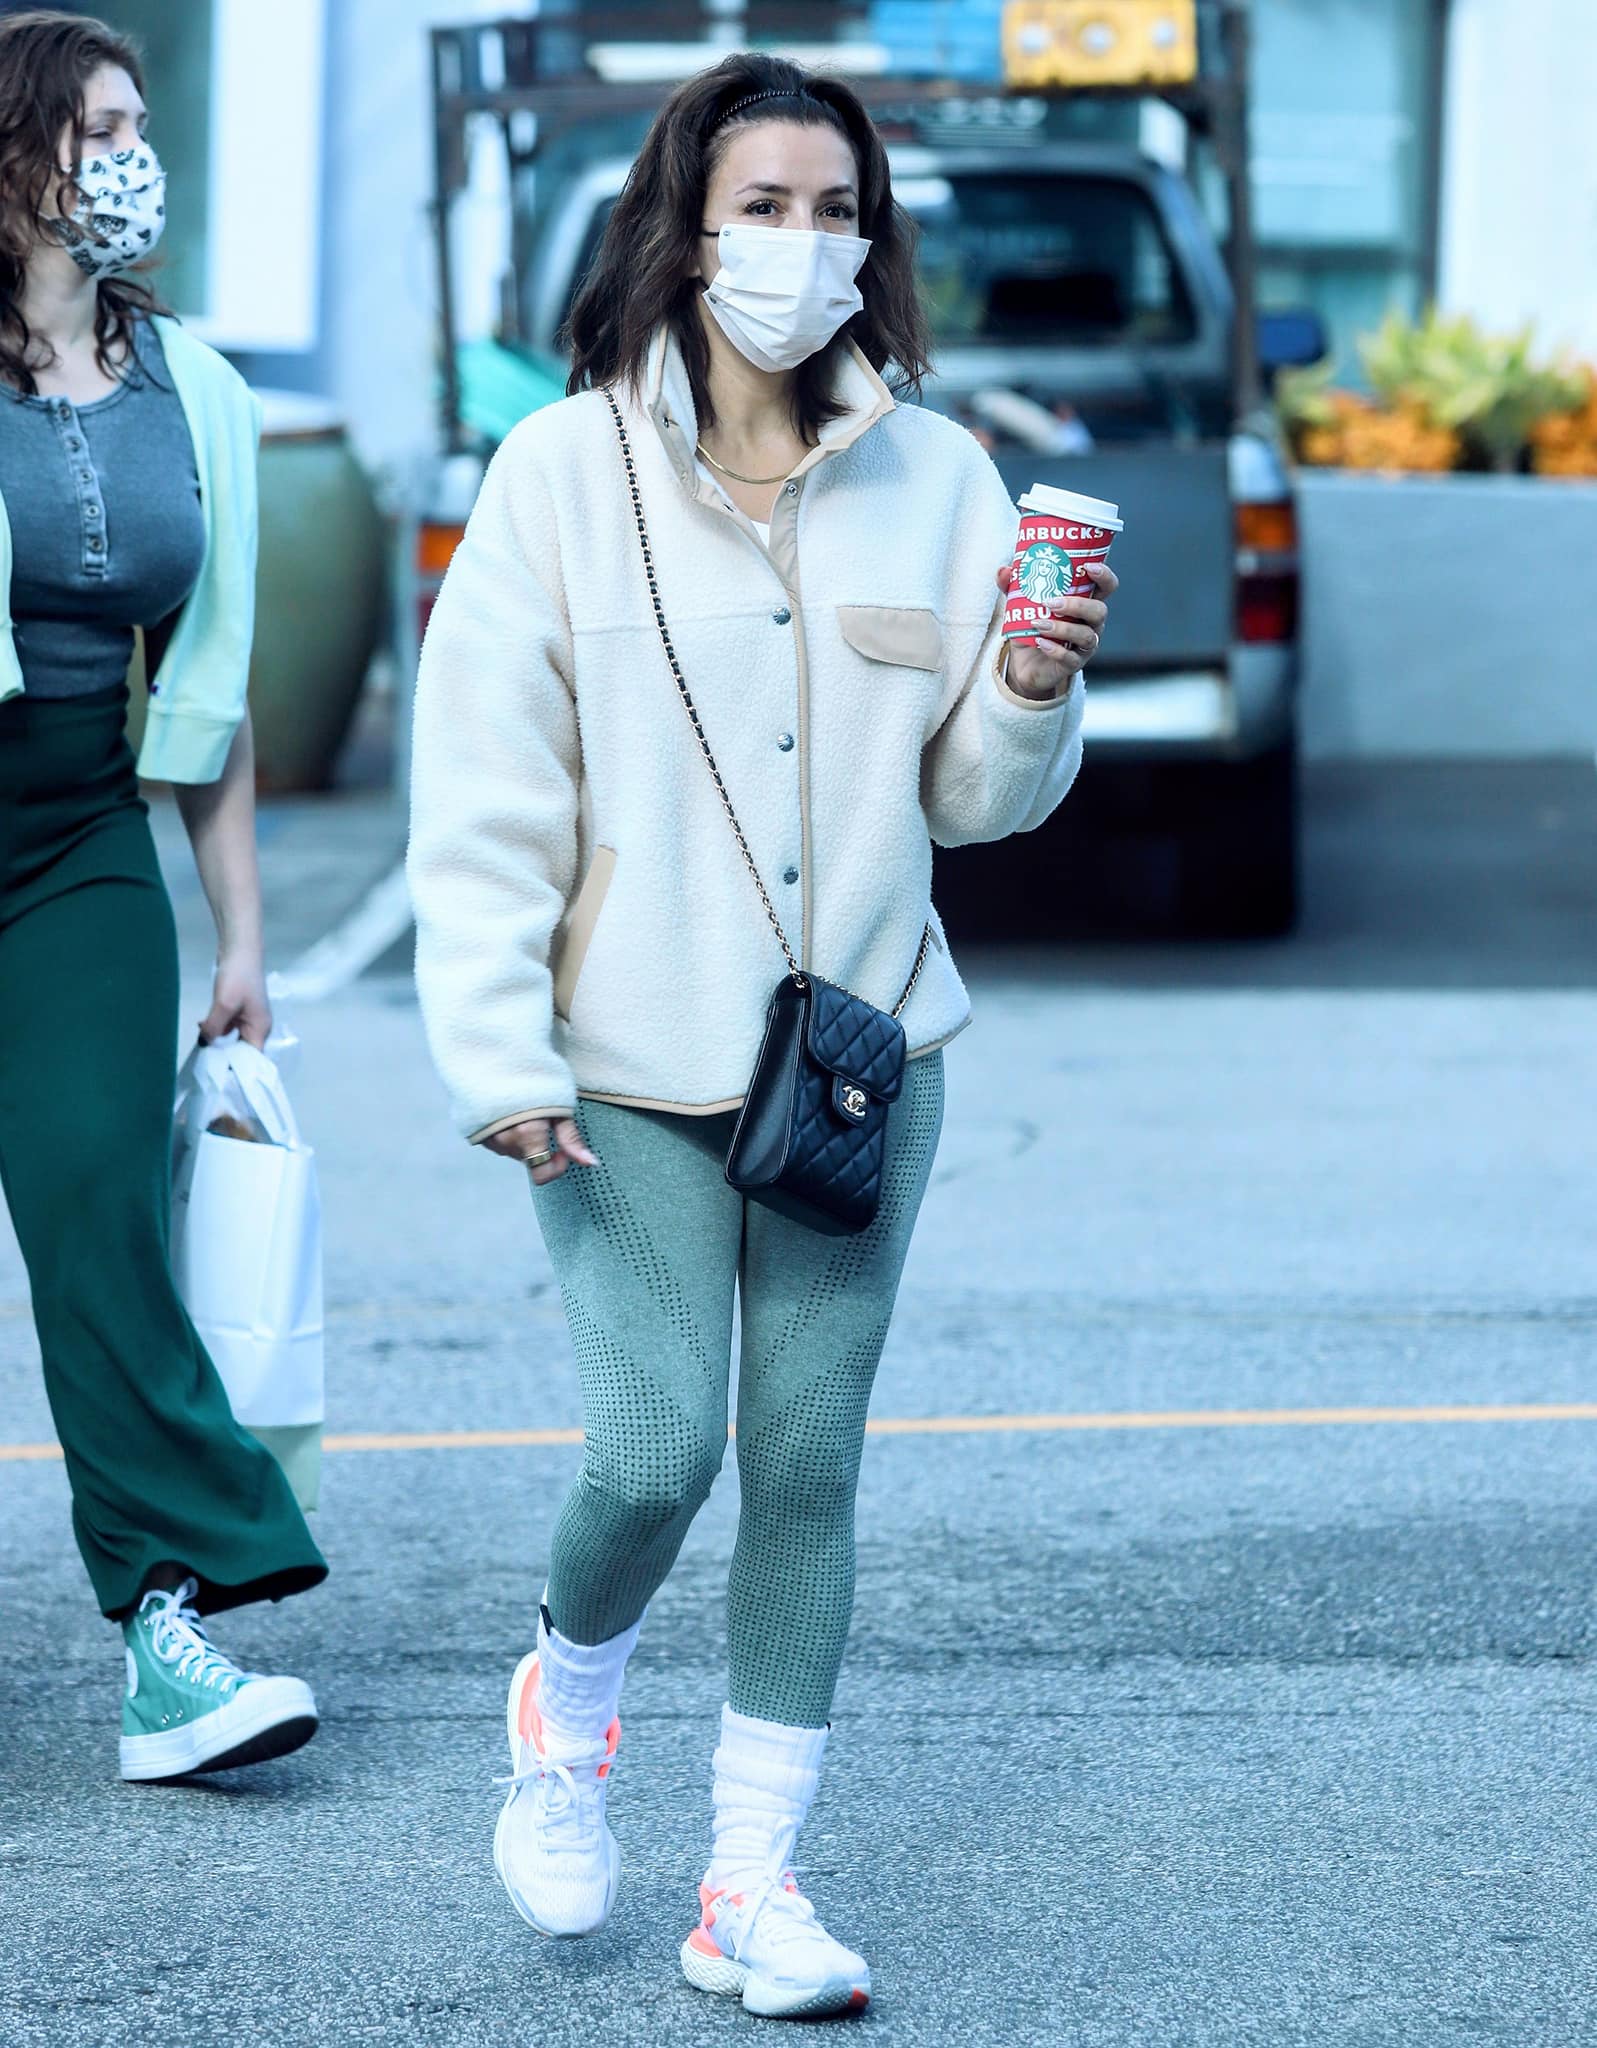 Eva Longoria stays cozy and warm in The North Face Cragmont fleece jacket and green leggings